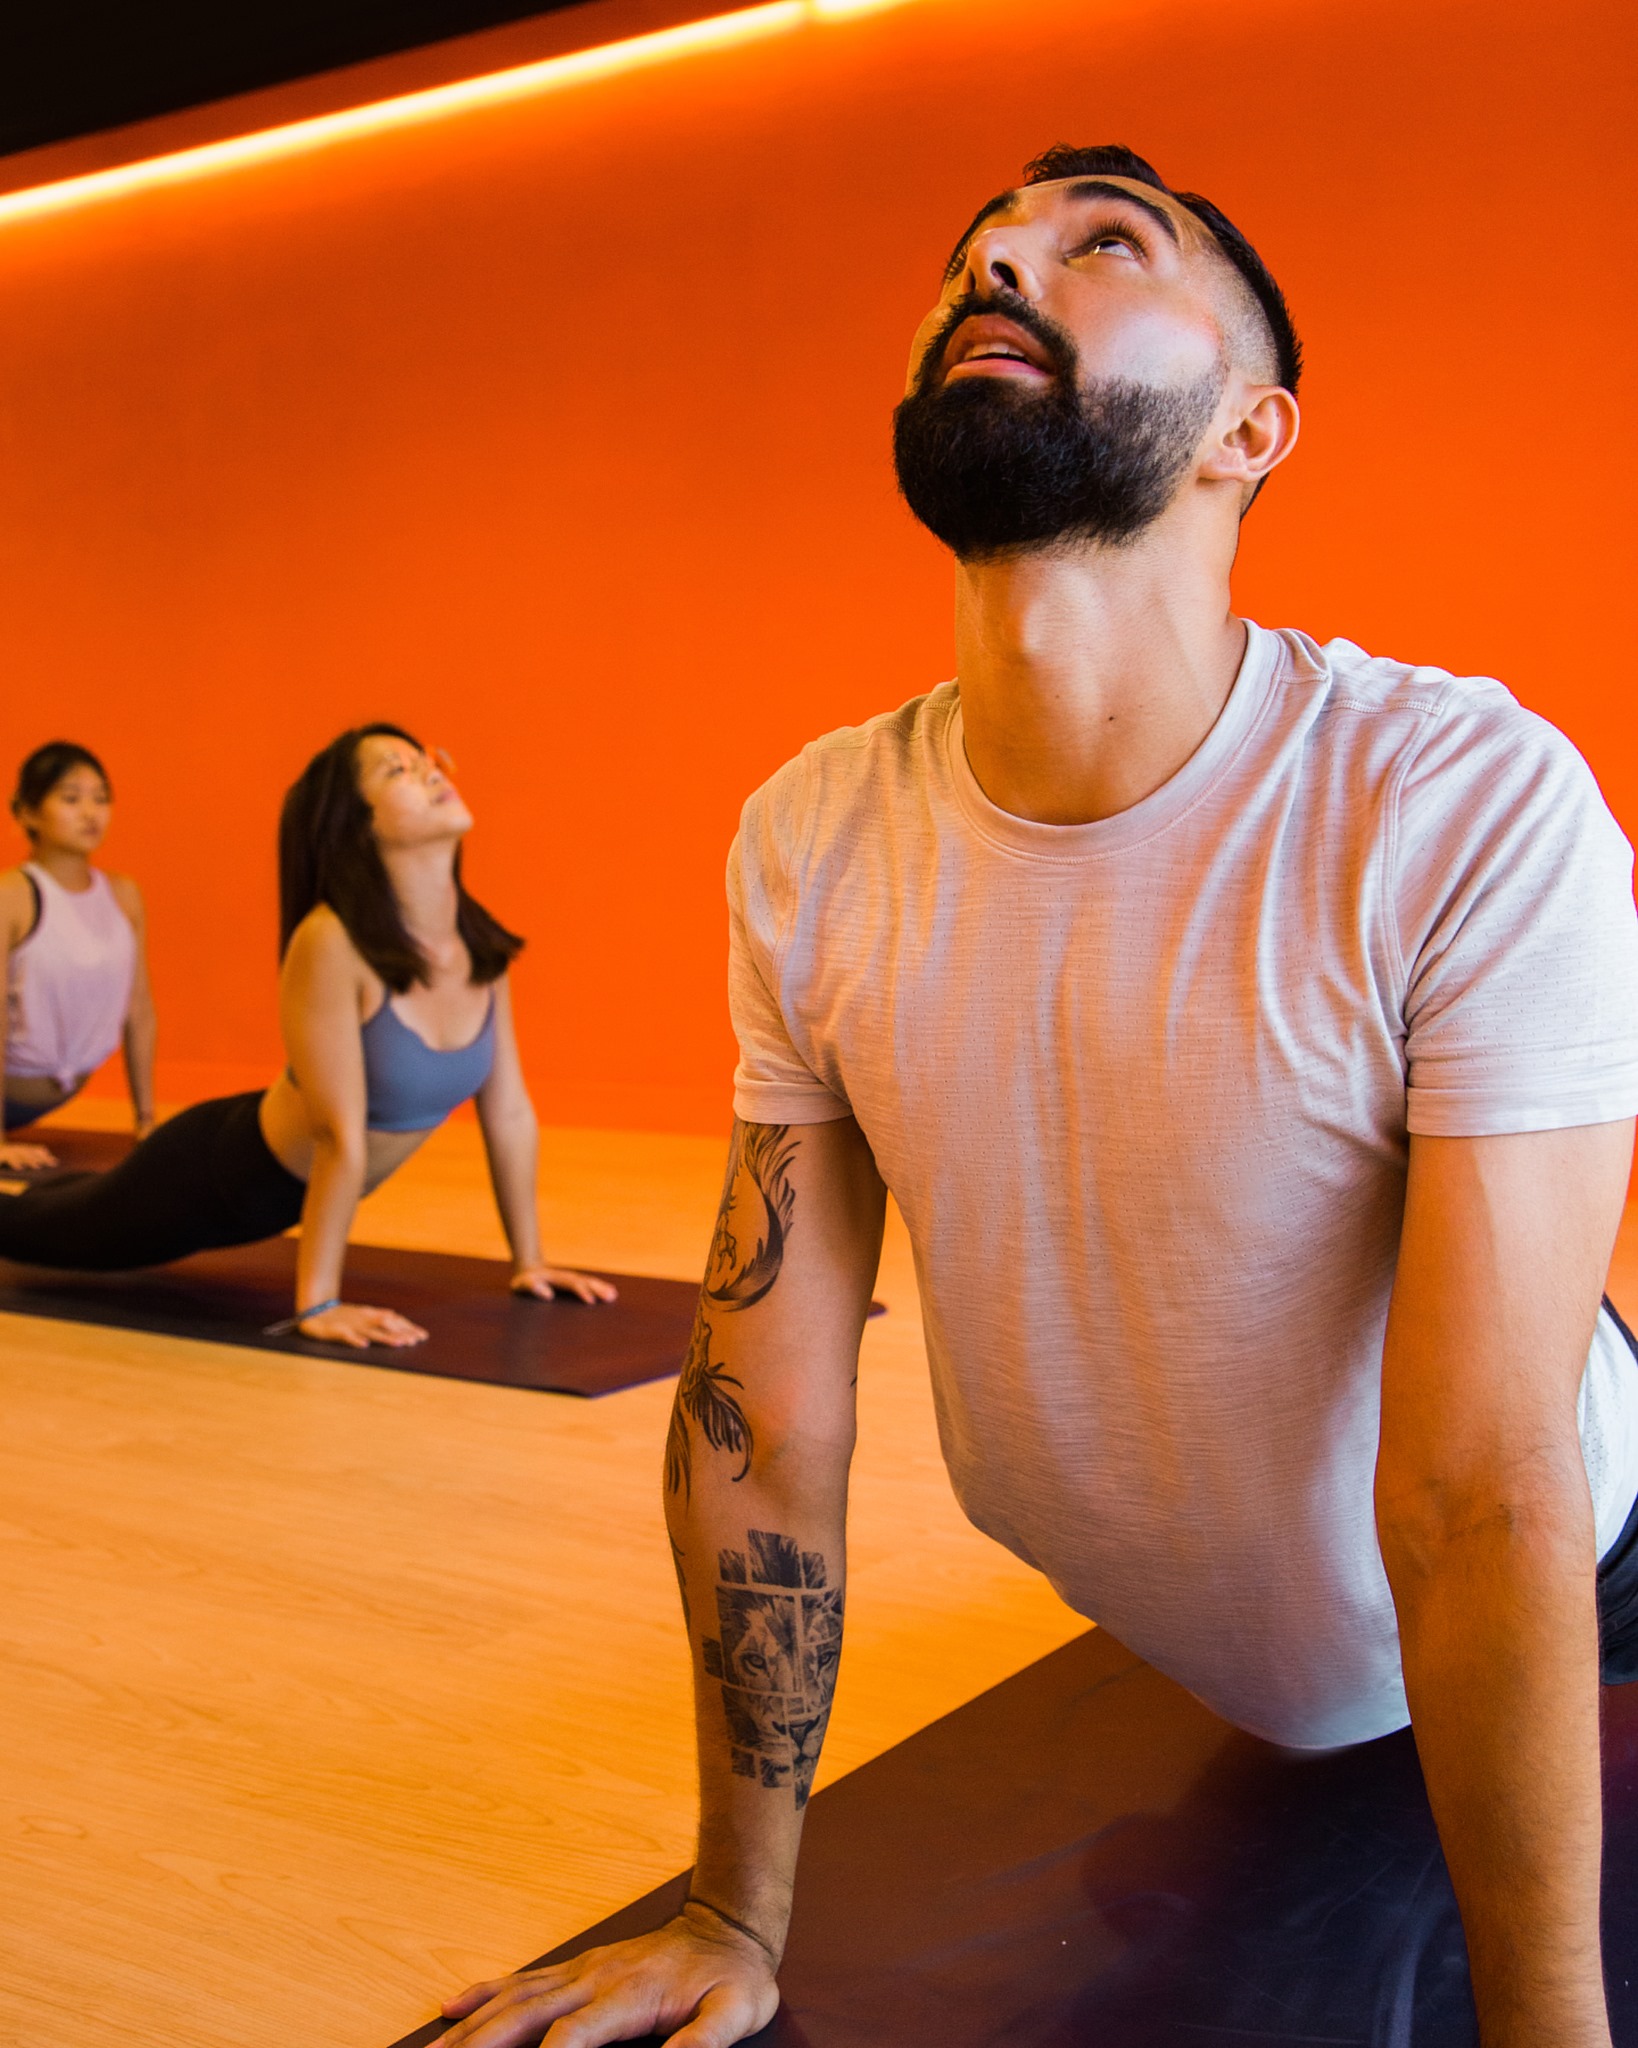 With the desire to help people overcome challenges and go through personal transformation, our Hysan Place ambassador Gianni Melwani recently opened IKIGAI